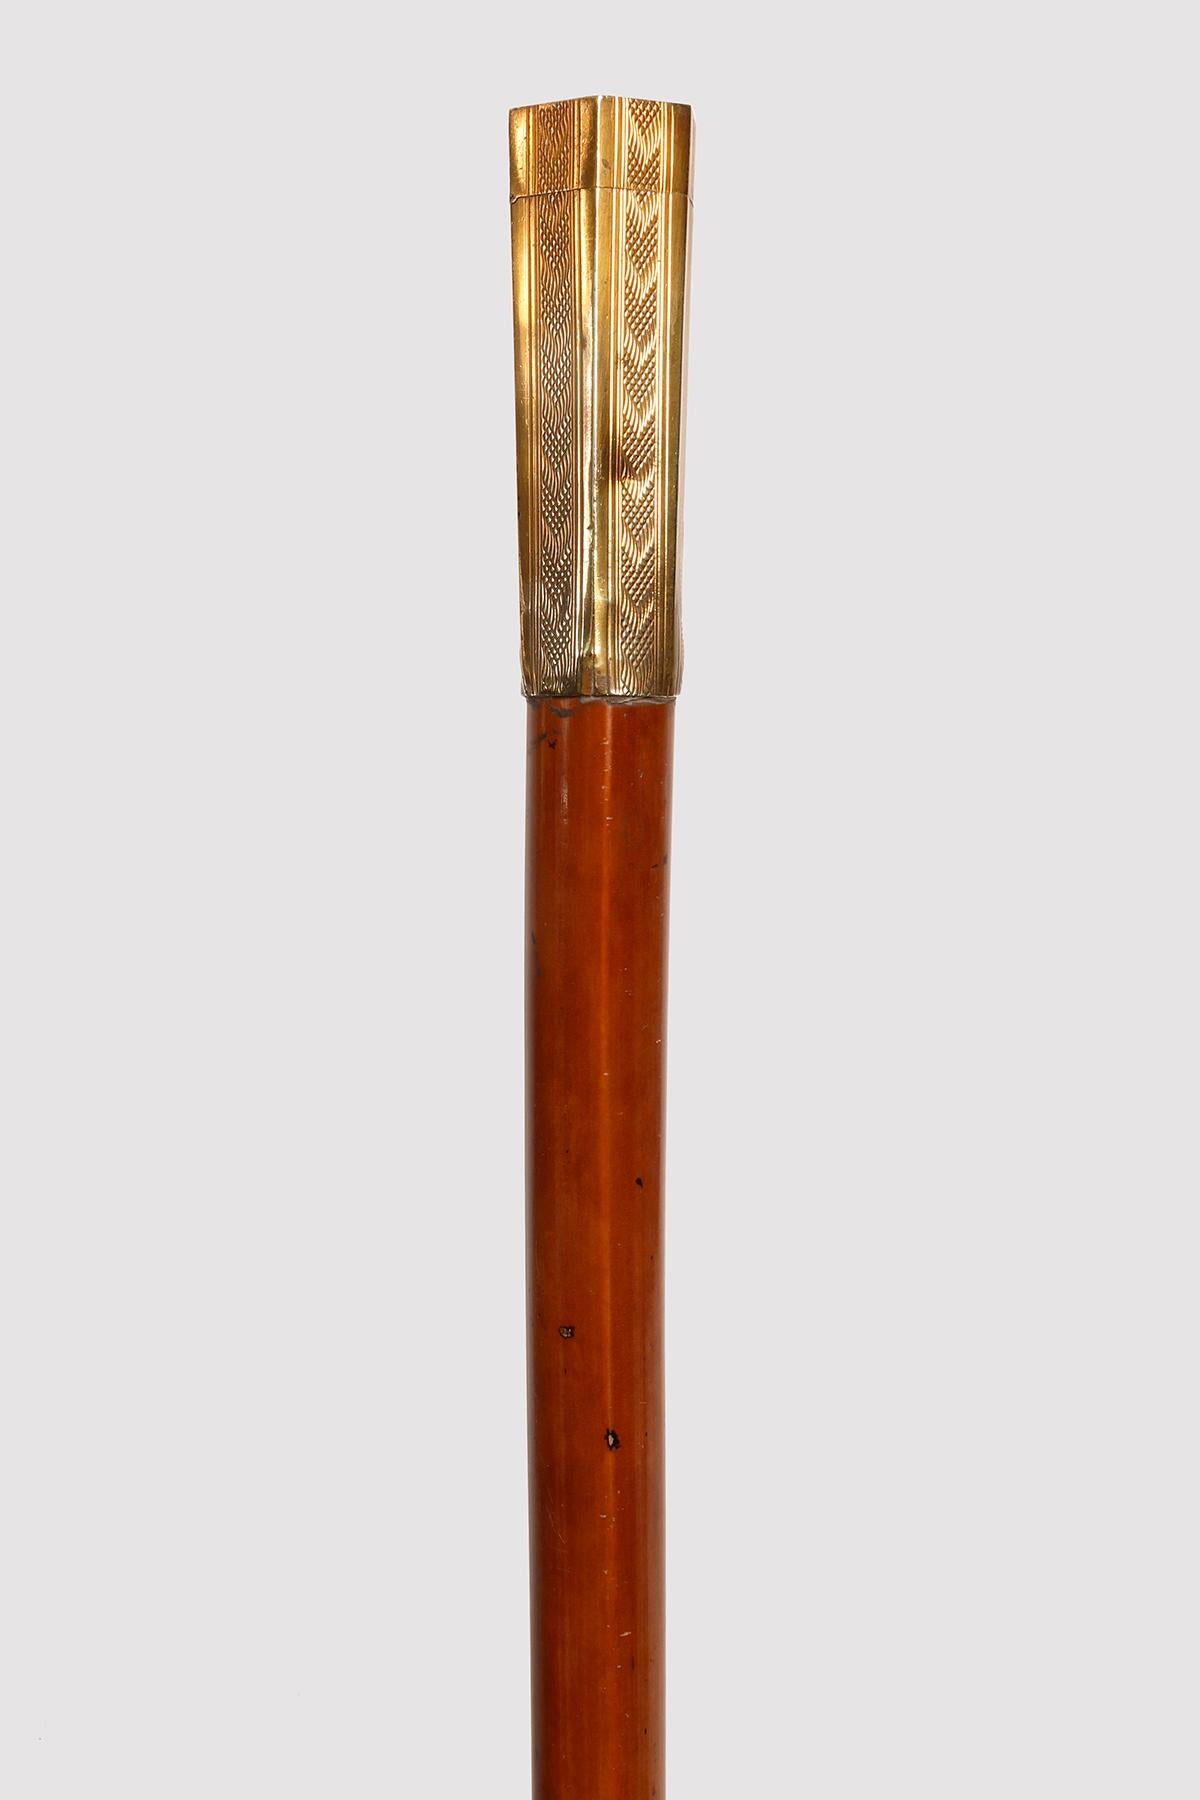 System walking stick with black cow horn tip. The barrel is made of light malacca. The handle is made of gilded brass, with an hexagonal section engraved with geometric motifs. The finial is hinged and opens to reveal a wick inside. France, around